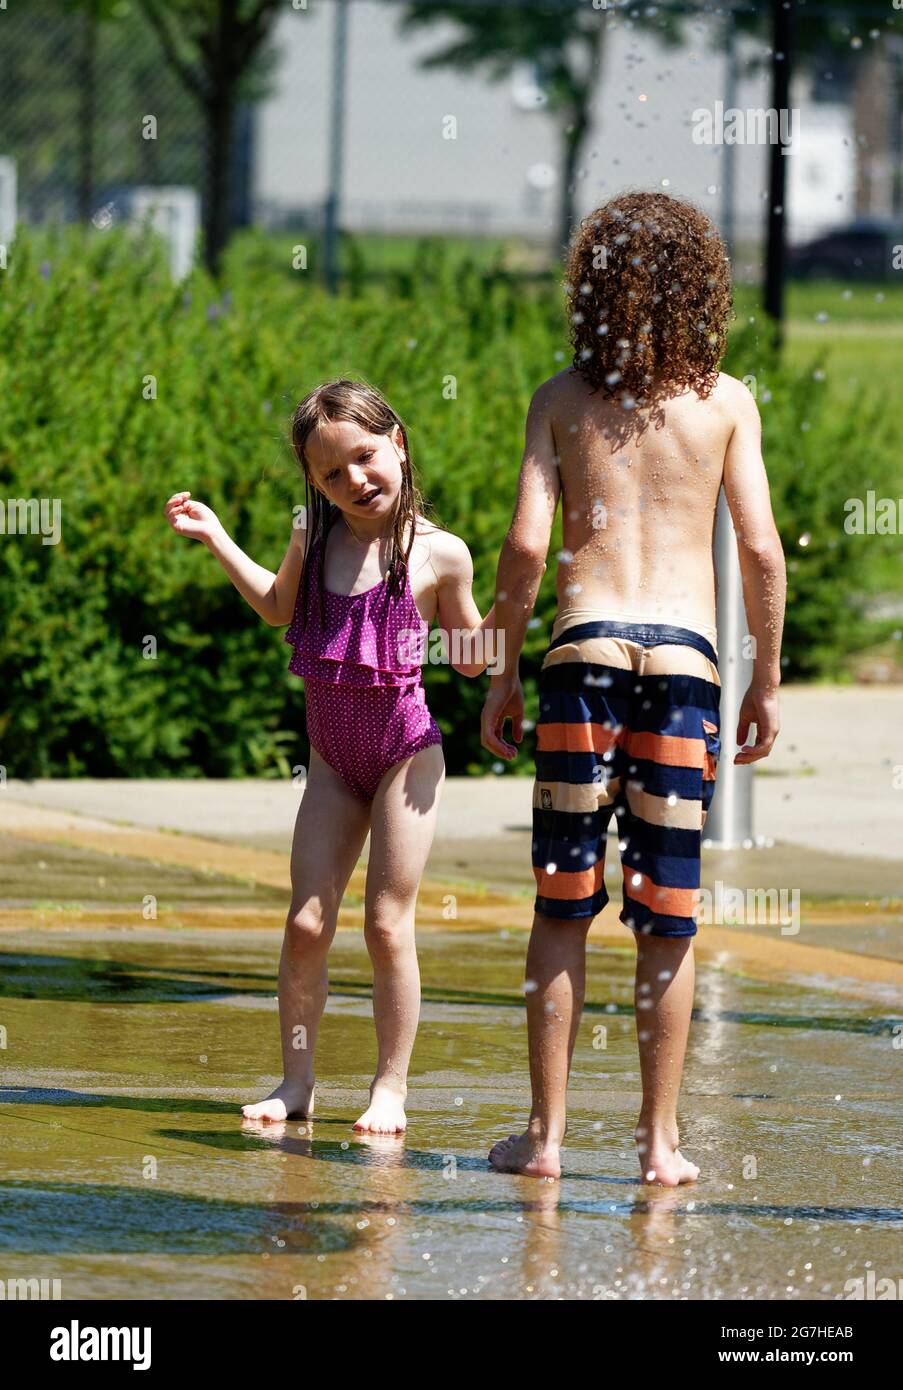 playing in water games and fountains in Quebec City, Canada Stock Photo